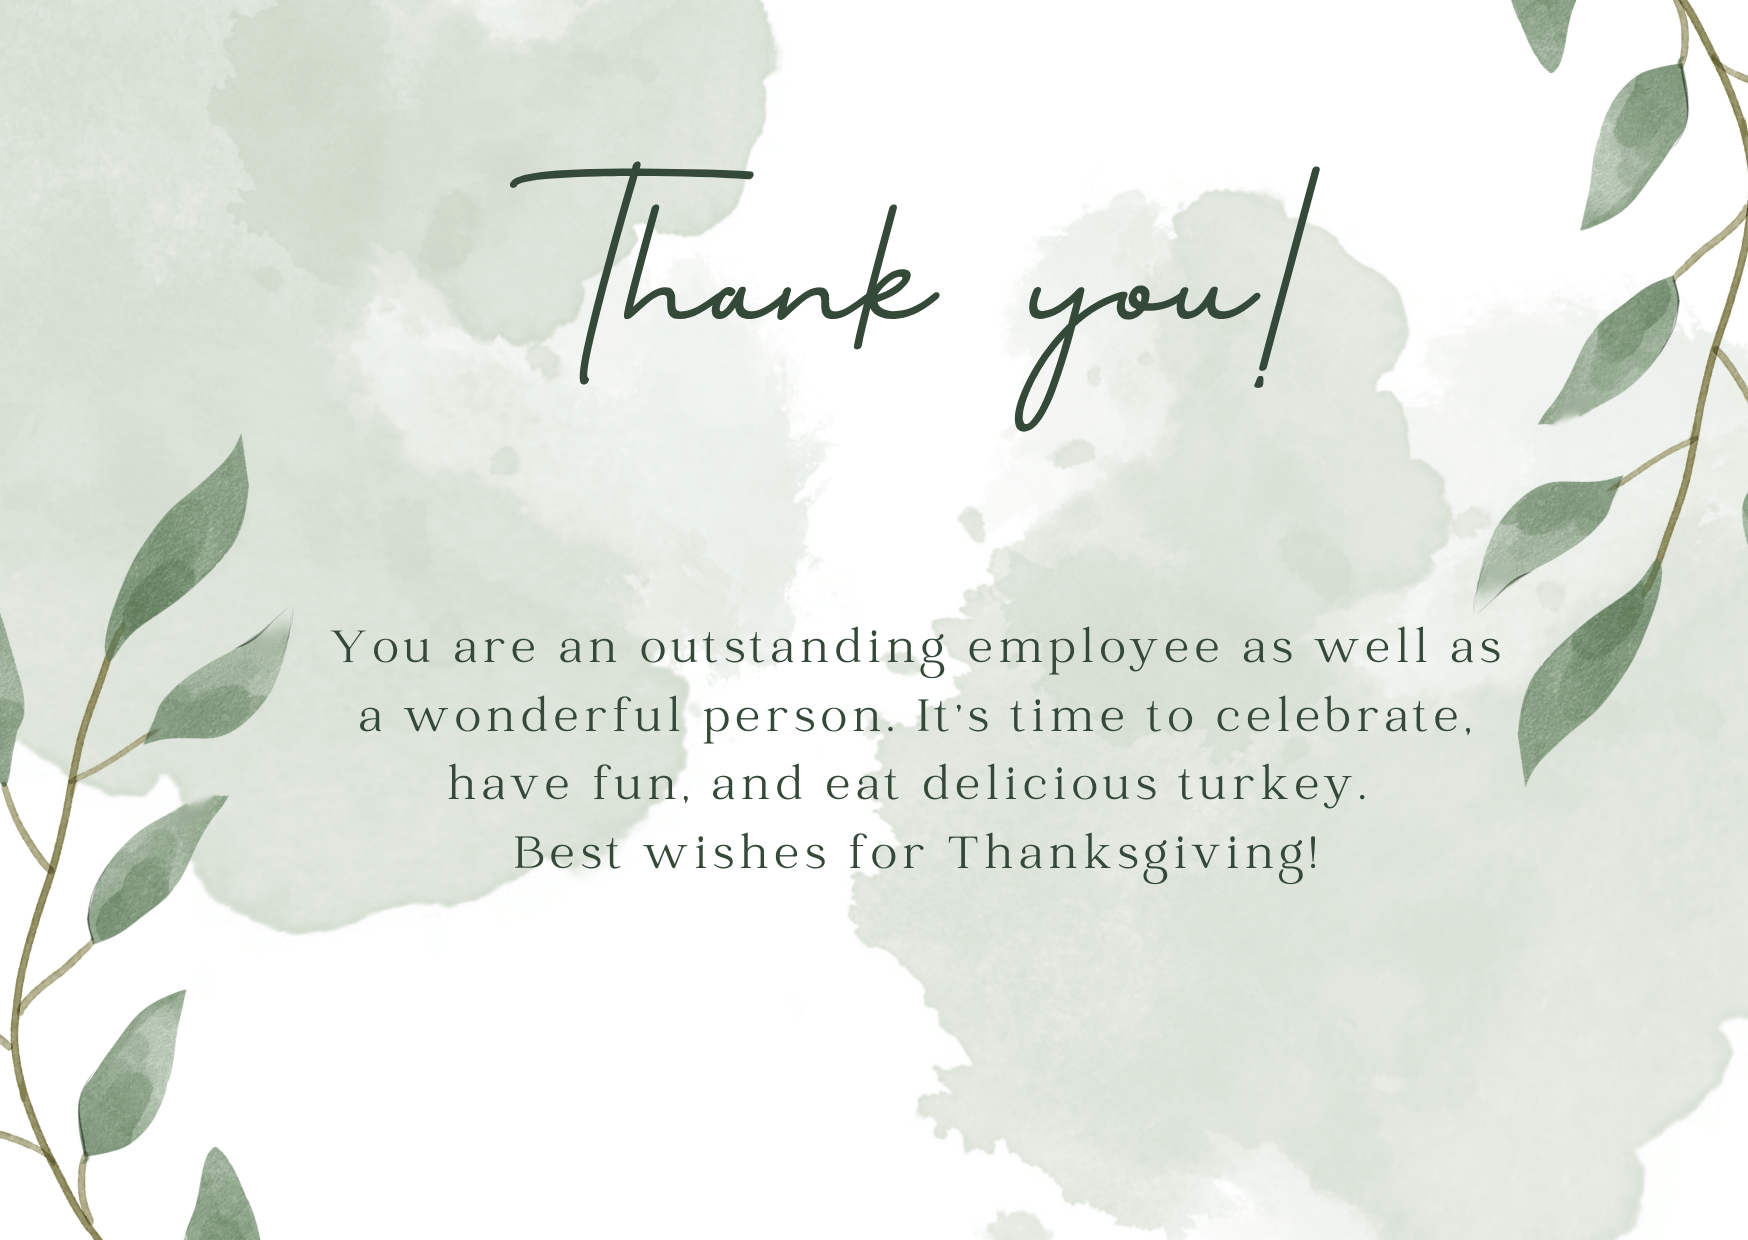 ThankGiving Card for your Employees